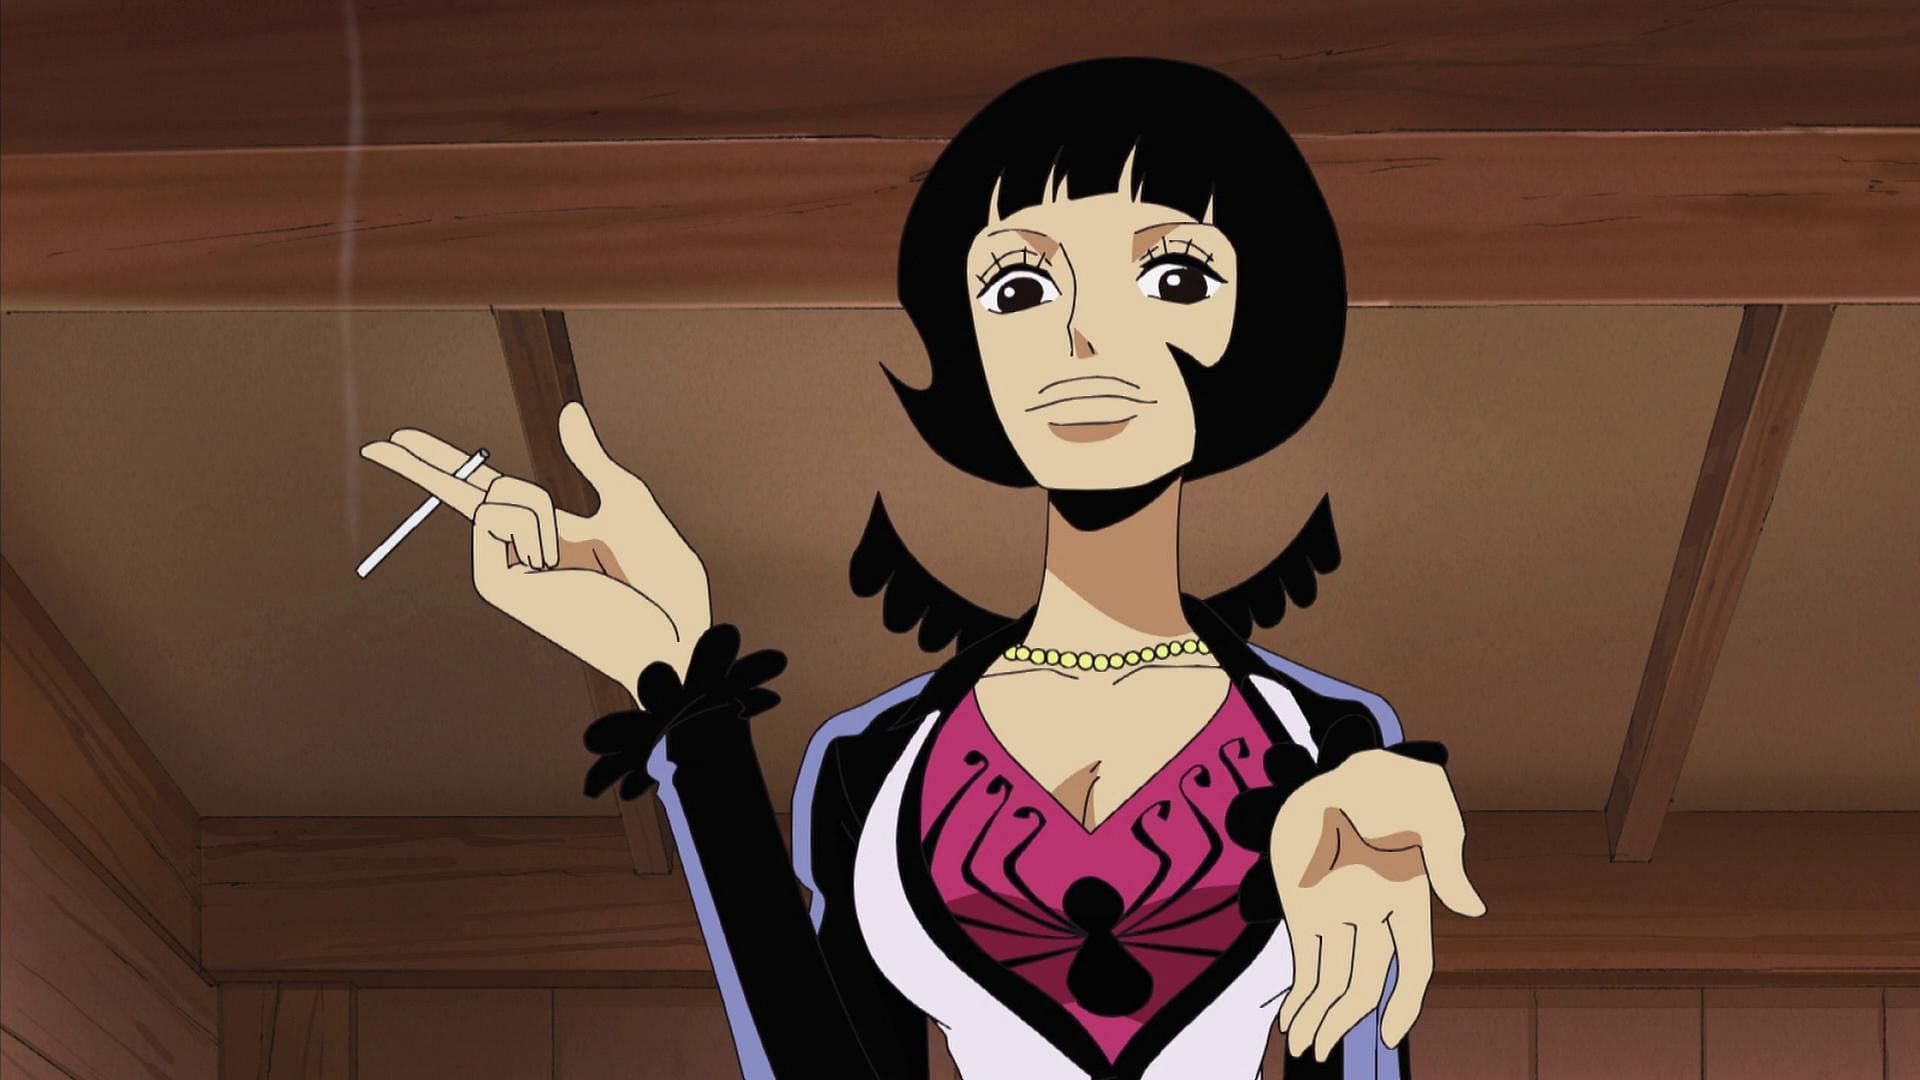 Shakky as seen in One Piece (Image via Toei Animation, One Piece)